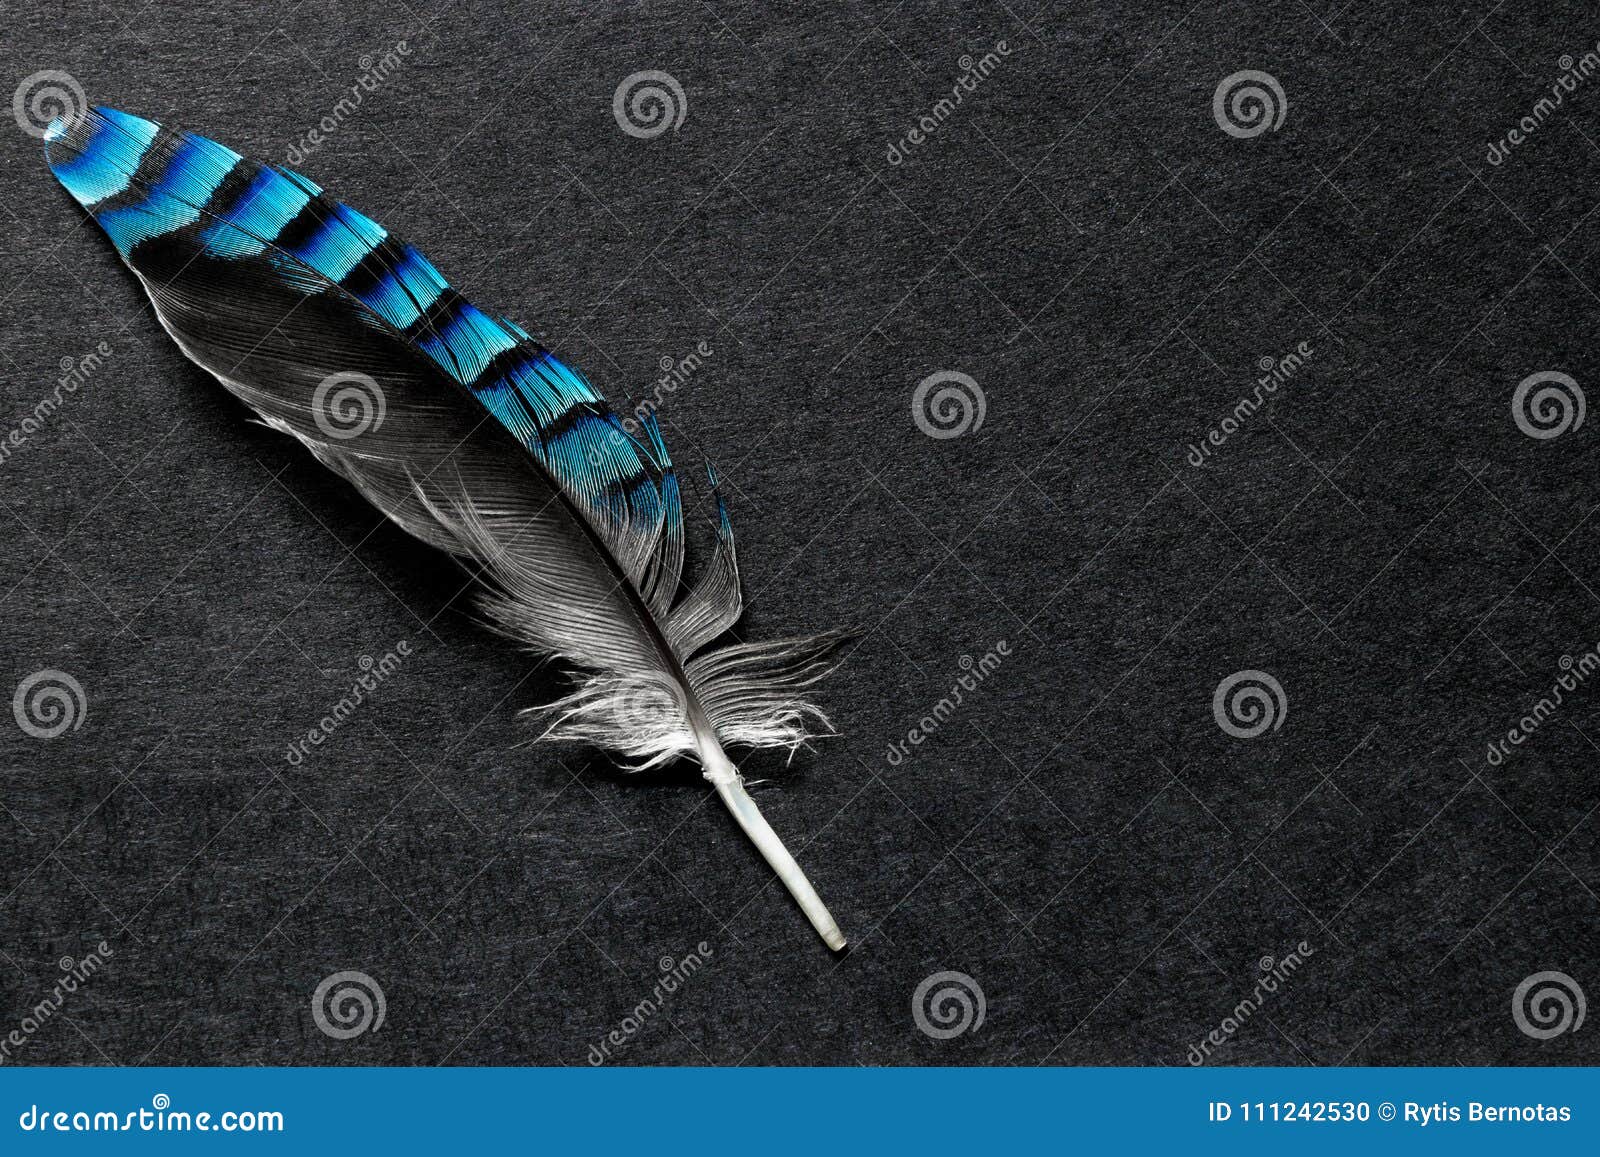 Blue Feathers On Black Image & Photo (Free Trial)